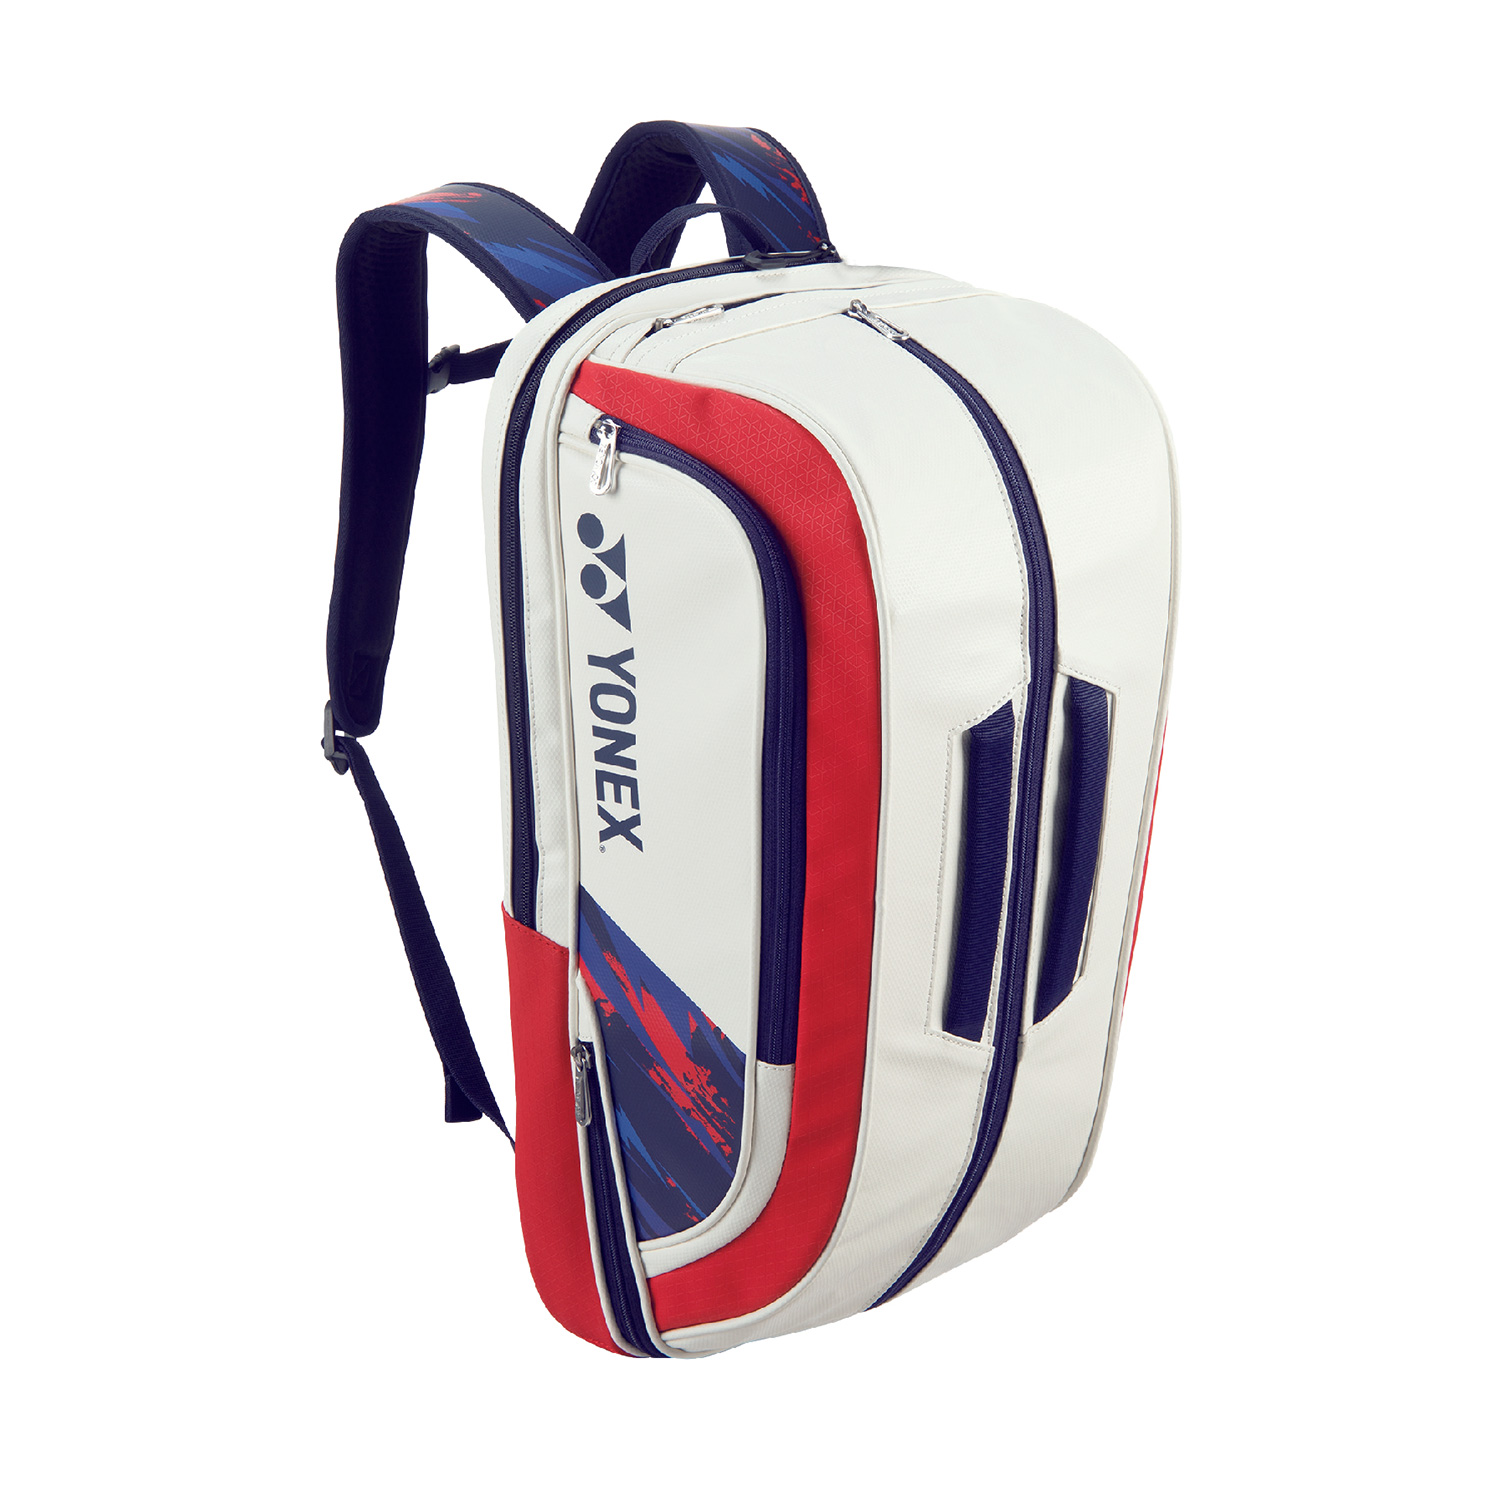 Yonex Expert Tournament Backpack - White/Blue/Red